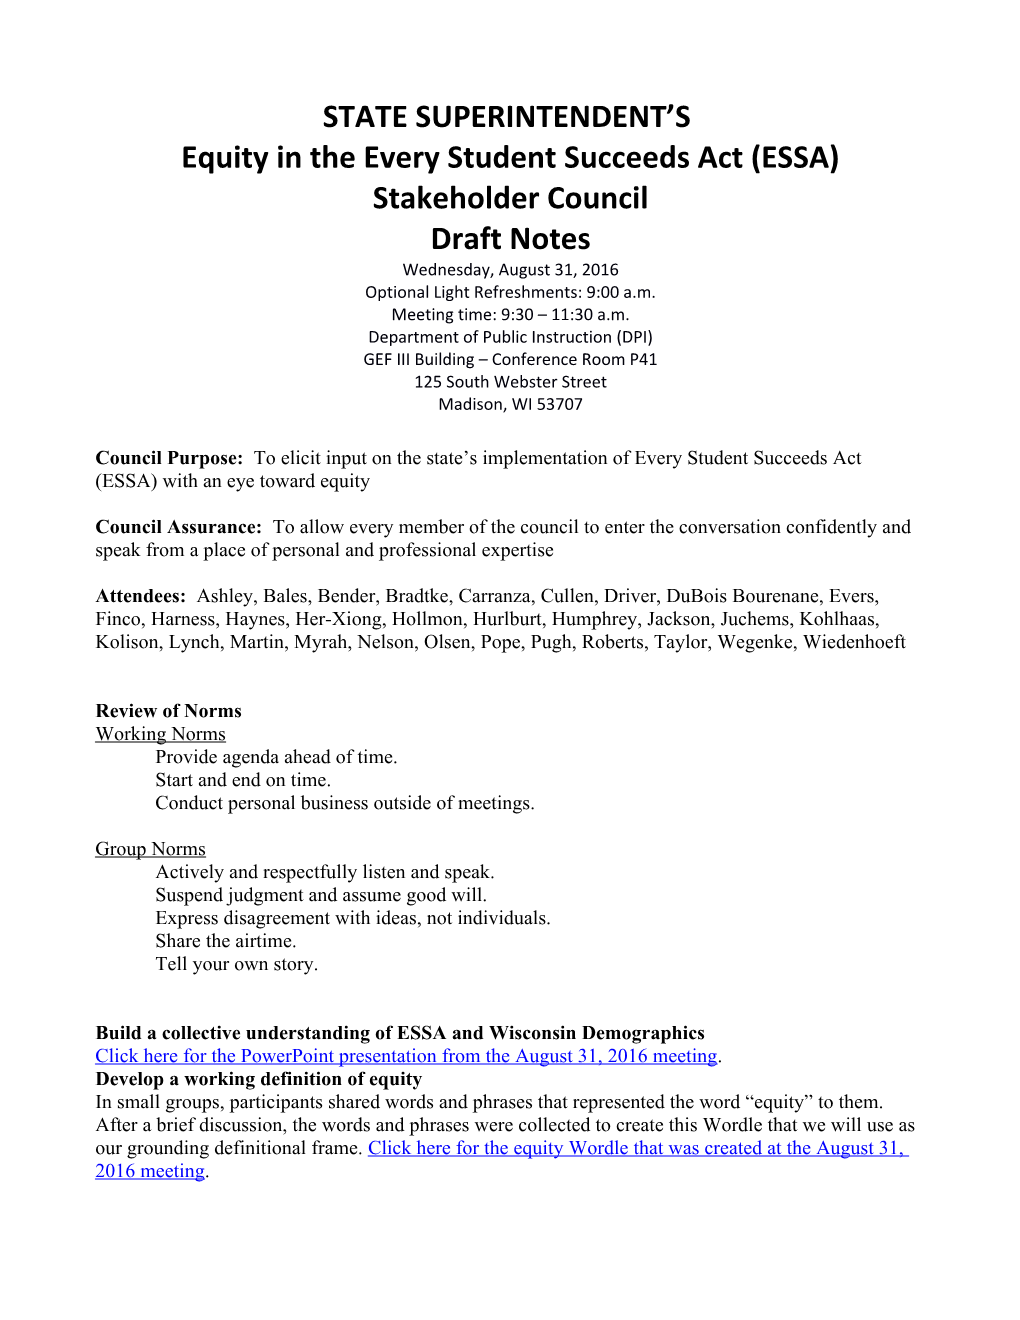 Equity in the Every Student Succeeds Act (ESSA)